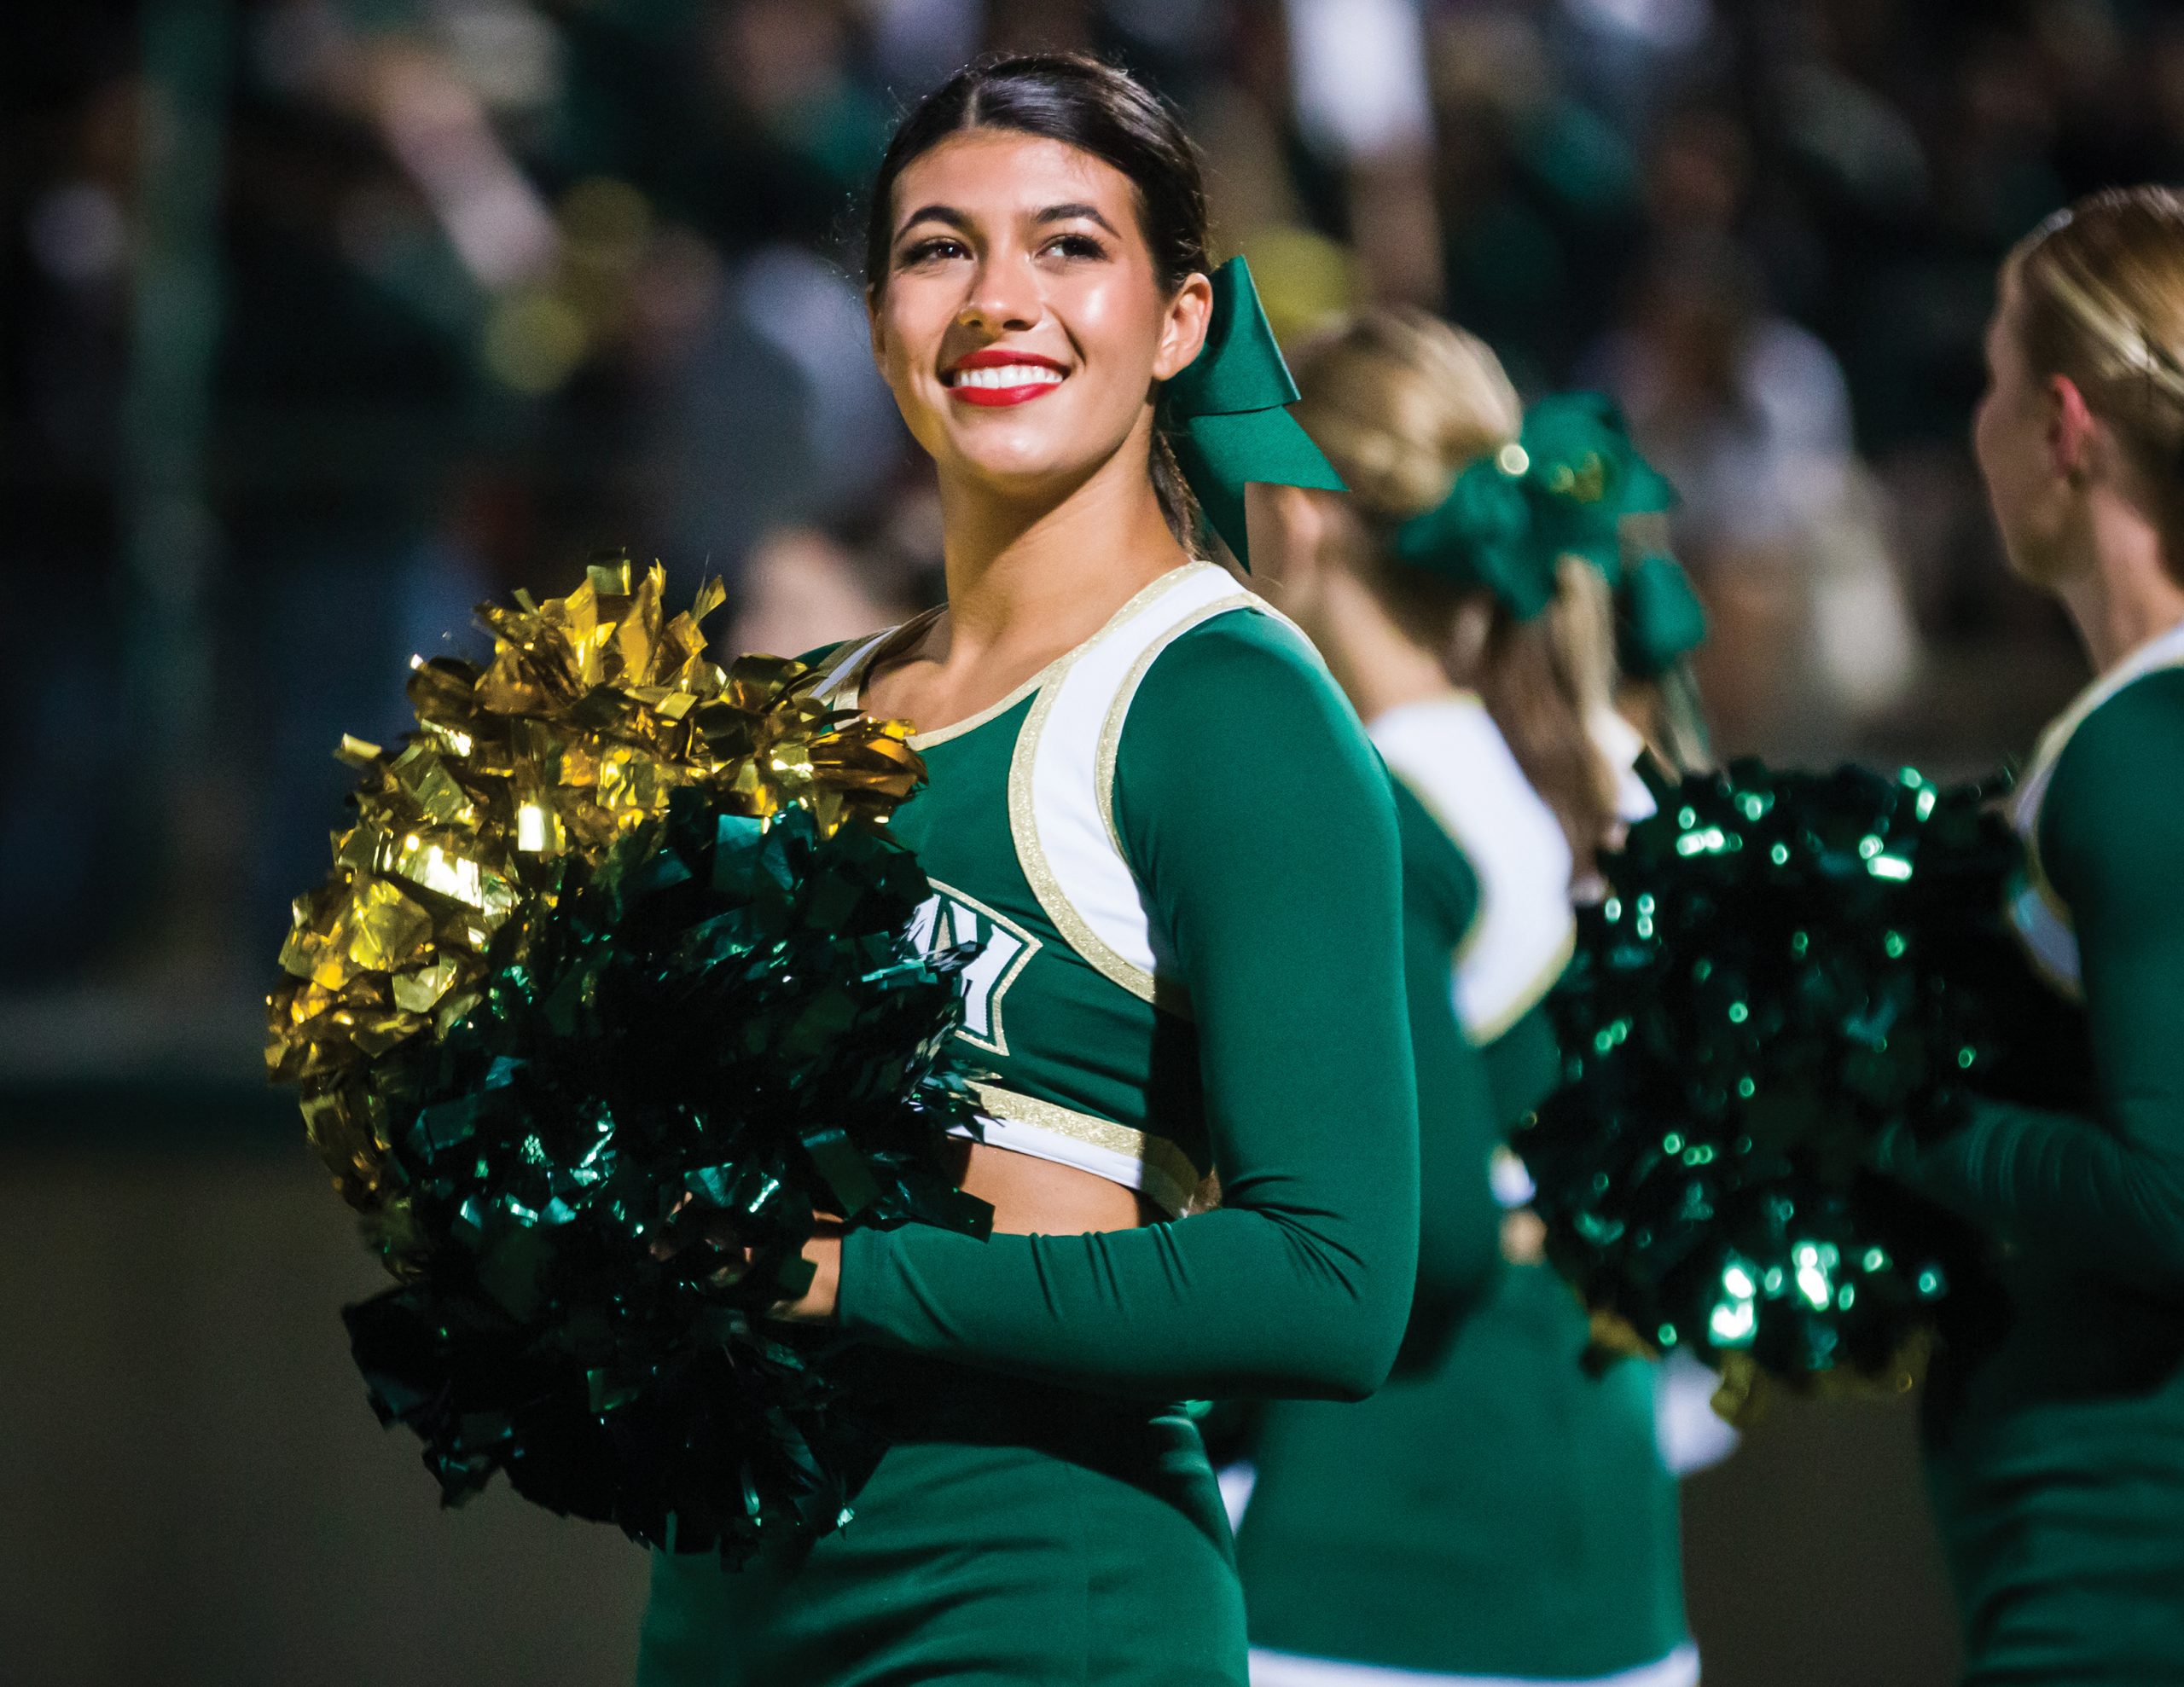 A young woman in a ponytail and green Cal Poly cheerleader uniform holds pom poms and smiles at the crowd in Spanos Statdium